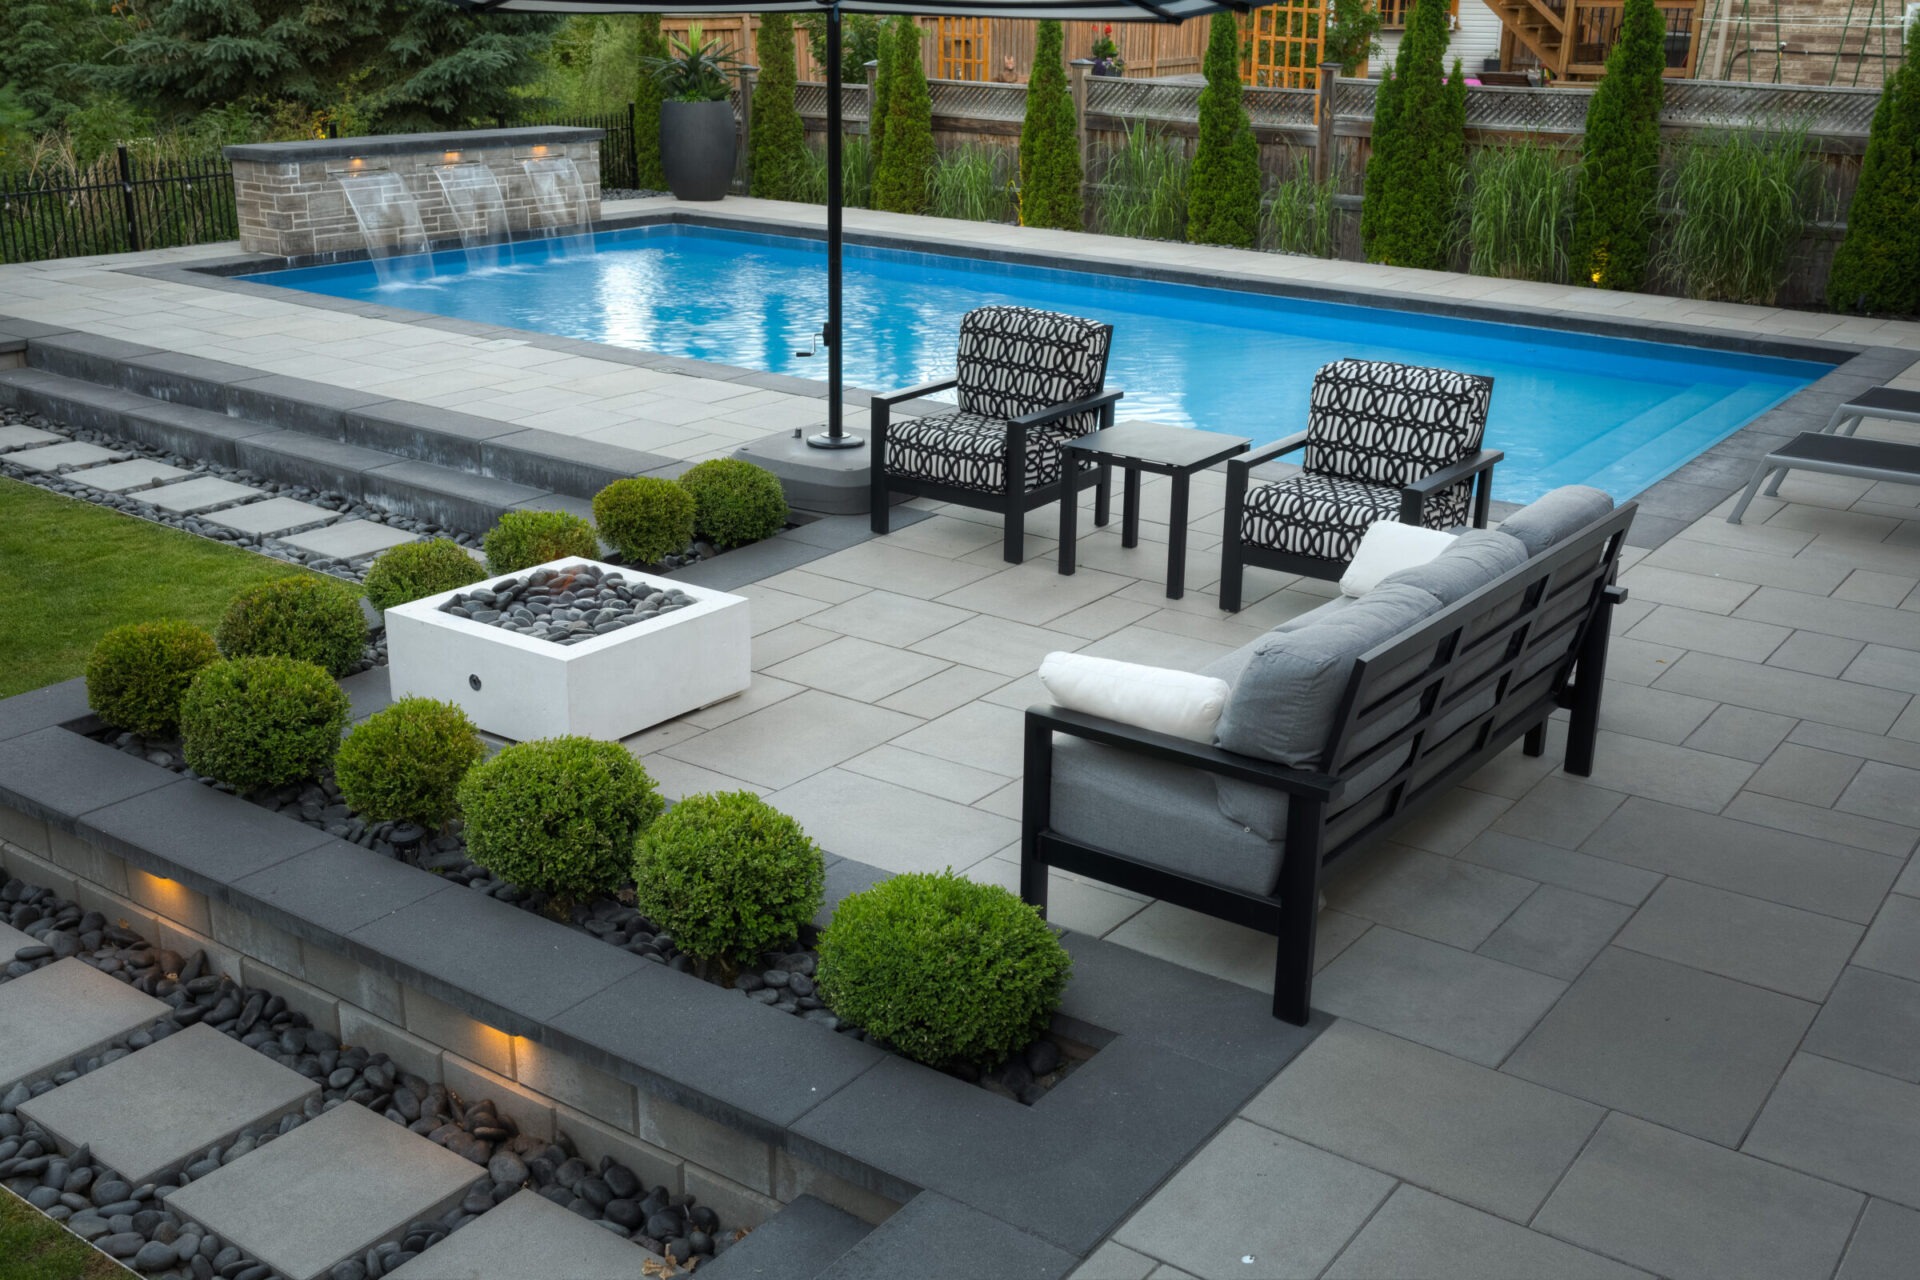 This image shows an elegant backyard with a swimming pool, patterned patio furniture, neat shrubbery, a fire pit, and ambient lighting at dusk.